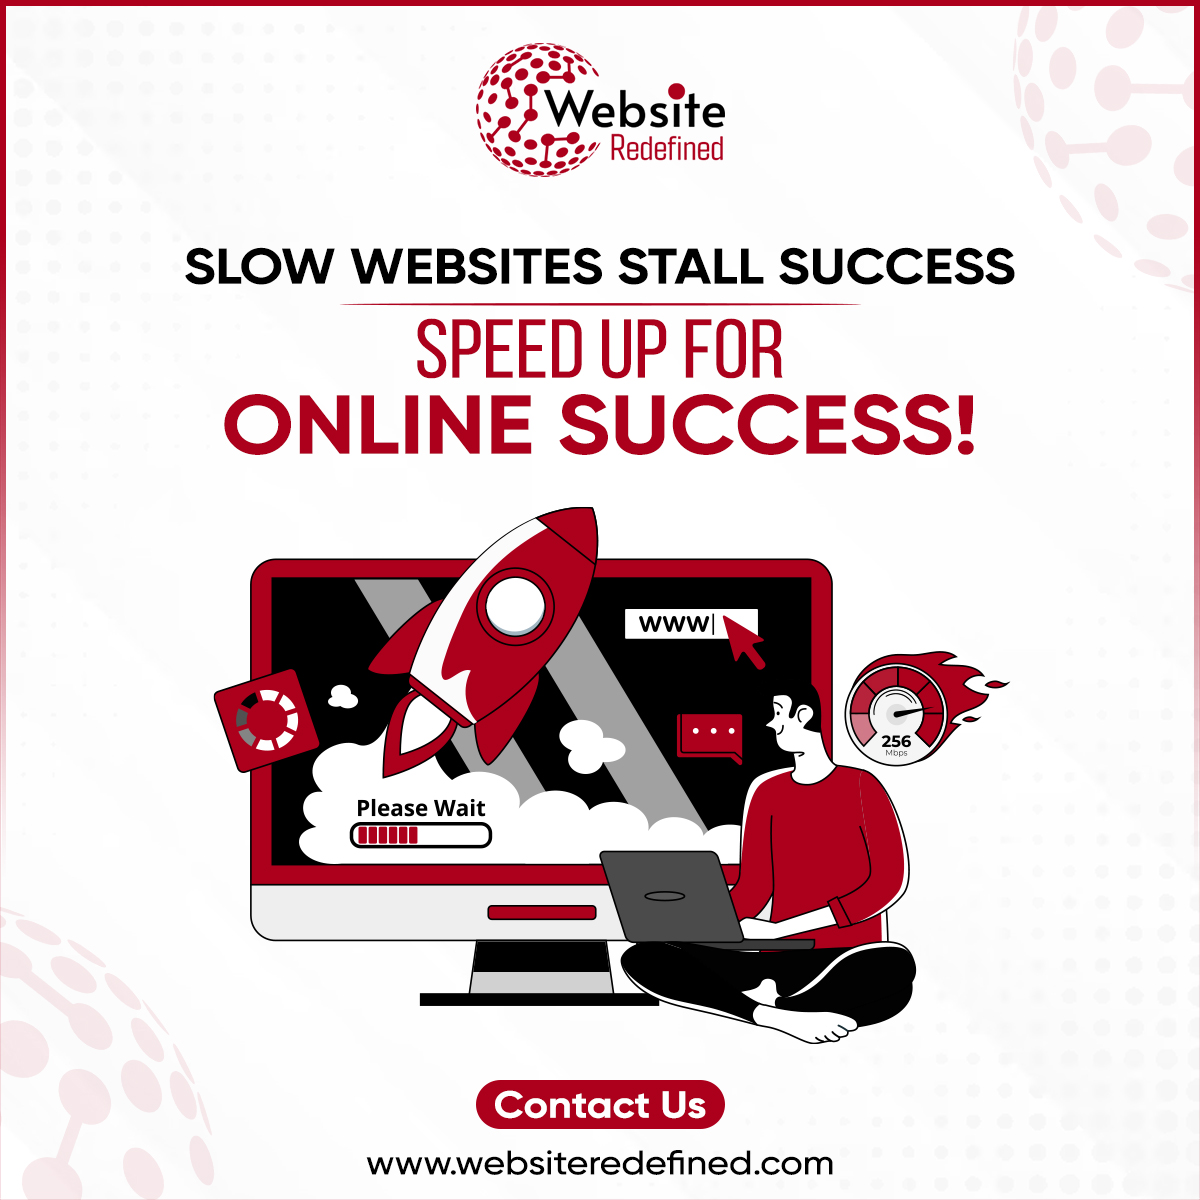 Slow website speed, fast goodbye! In the digital race, every second counts. Accelerate your website's heartbeat for engagement that captivates and converts seamlessly.

Contact Us!
websiteredefined.com

#websiteloading #websiteredefined